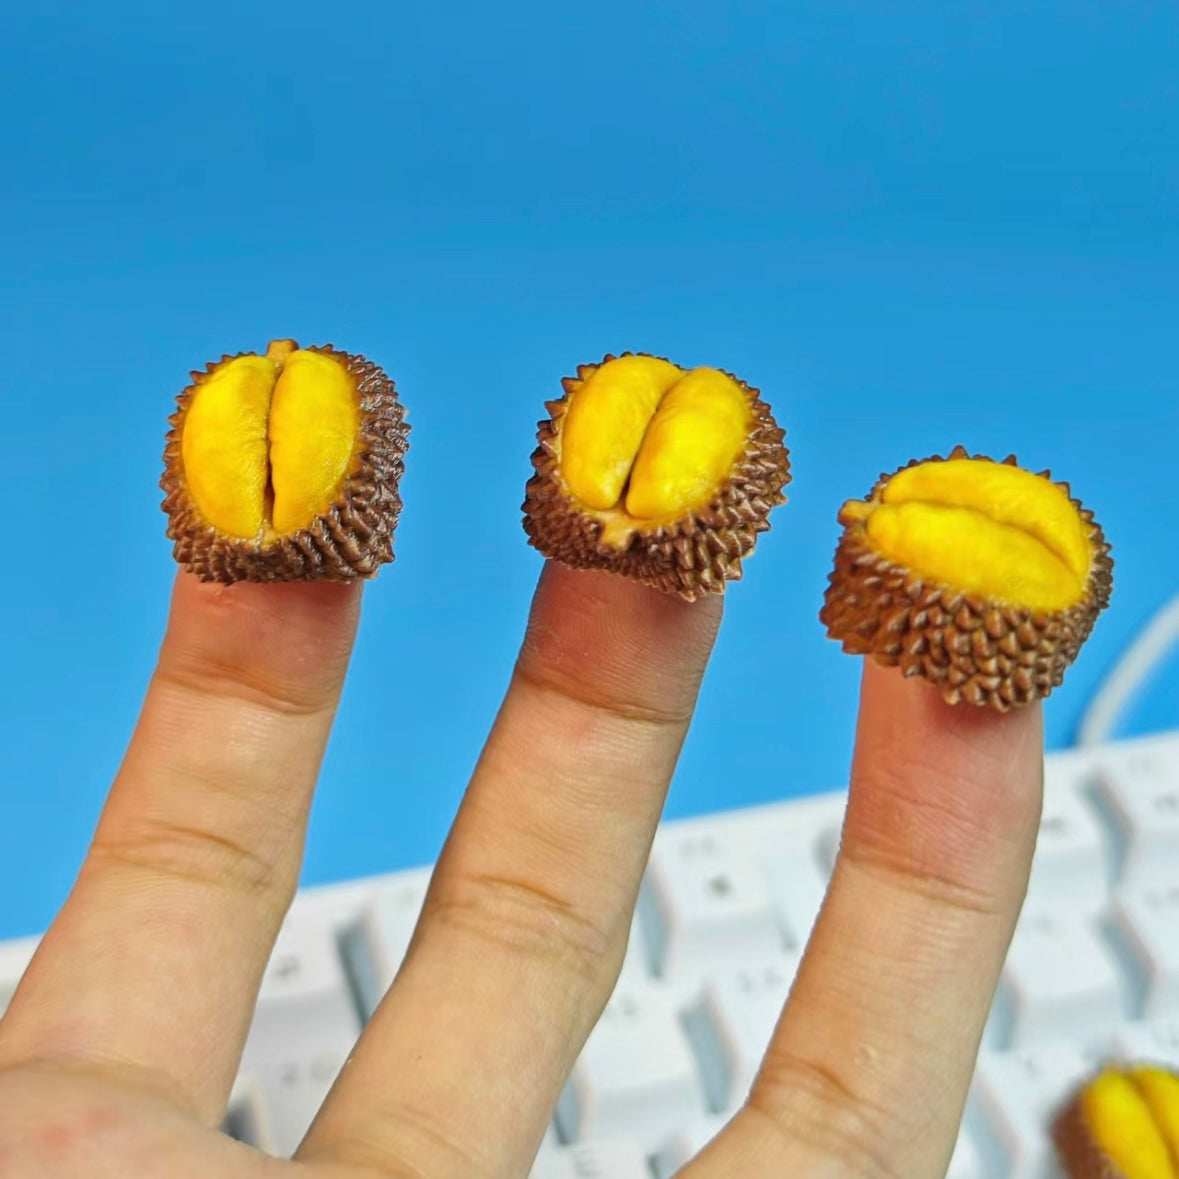 "Introducing our Durian Artisan Keycaps, inspired by the infamous tropical fruit. These keycaps feature the distinctive thorny texture of a durian, meticulously simulated to add a unique touch to your keyboard. While the real fruit has a strong odor, these keycaps bring the durian's visual charm without the scent. Elevate your keyboard with these one-of-a-kind, durian-inspired artisan keycaps." 🌳🍈💻 #KeyboardAccessories #ArtisanKeycaps #DurianDesign